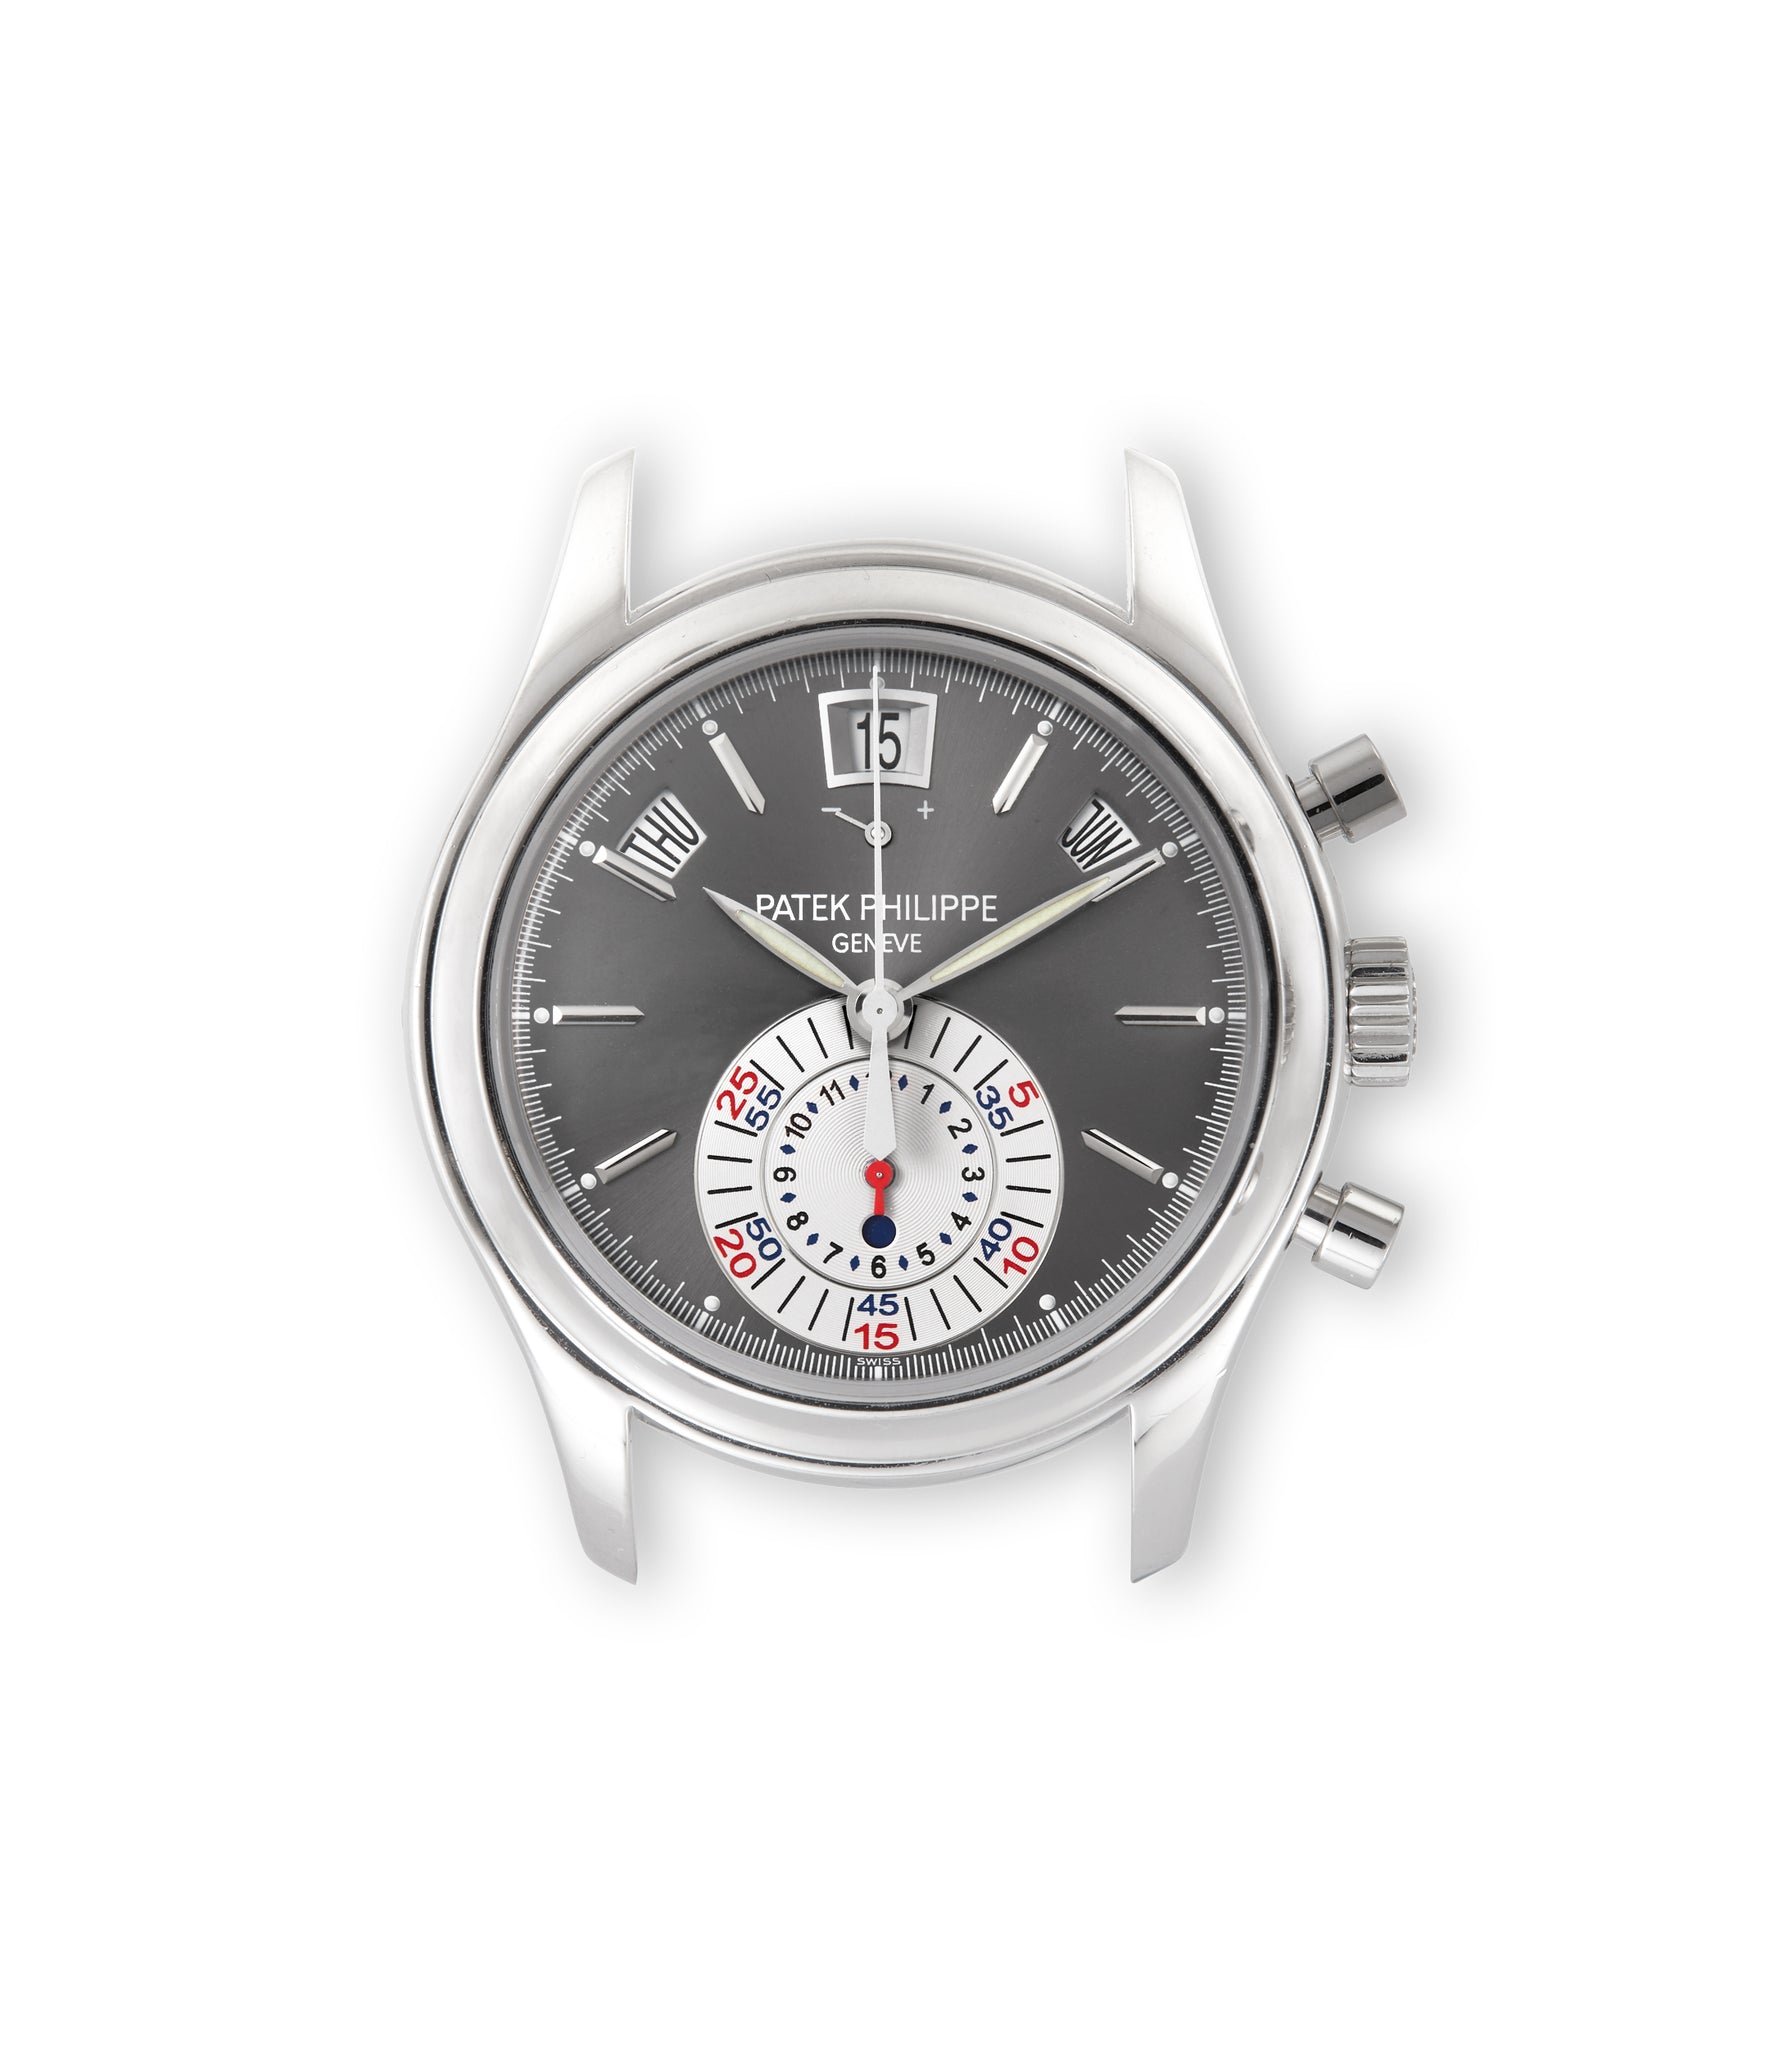 buy Patek Philippe Annual Calendar Chronograph 5060P-001 Platinum preowned watch at A Collected Man London